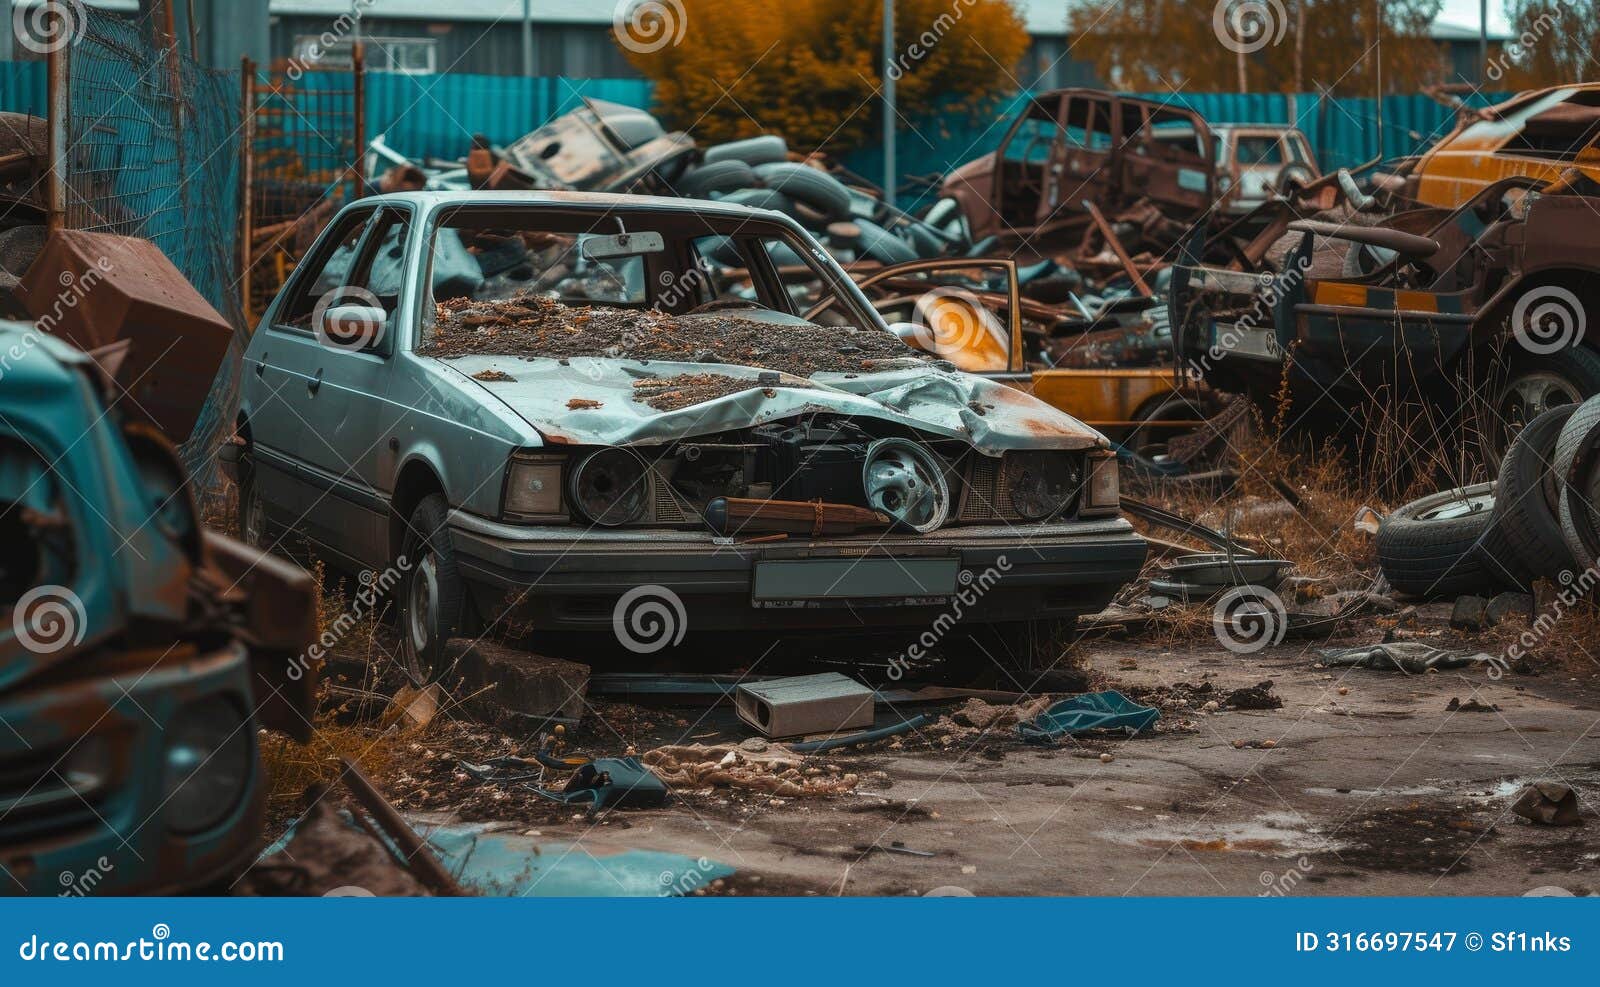 wrecked and rusted cars pile up in a cluttered junkyard, showcasing neglect and decay.